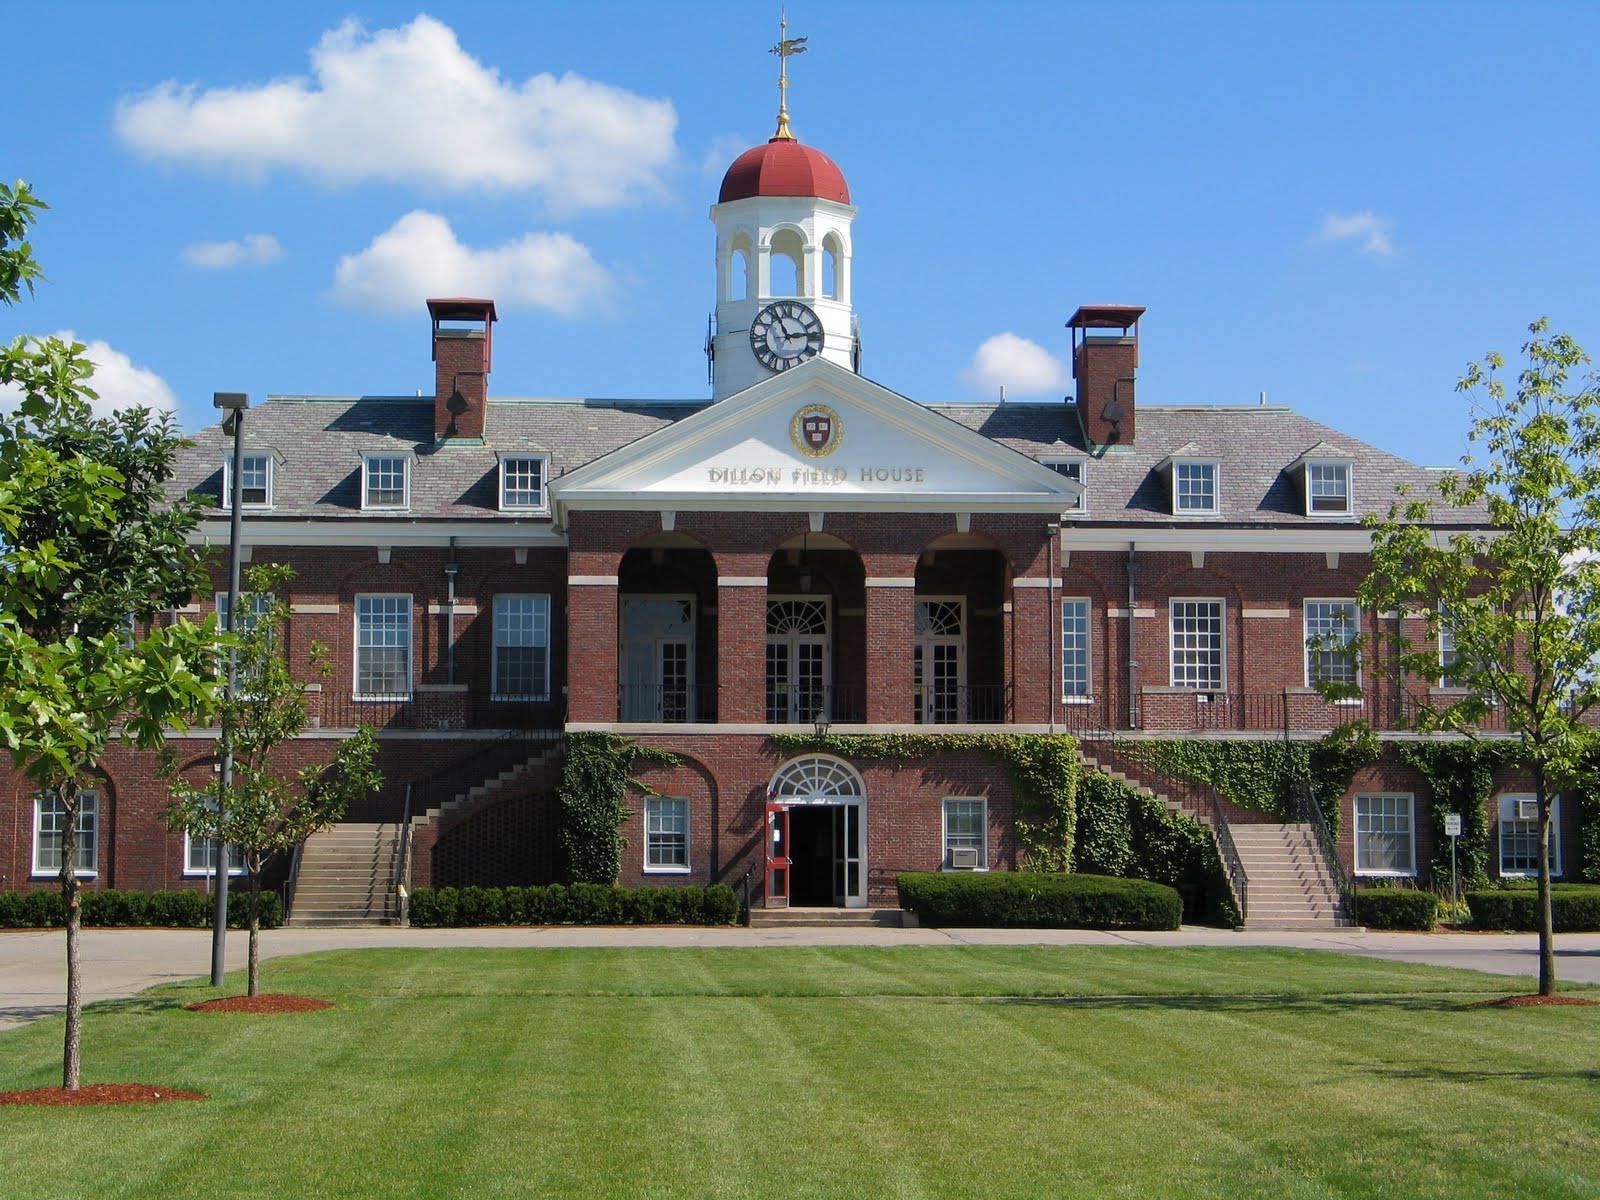 A large brick building with a red dome and a clock on the front. - Harvard